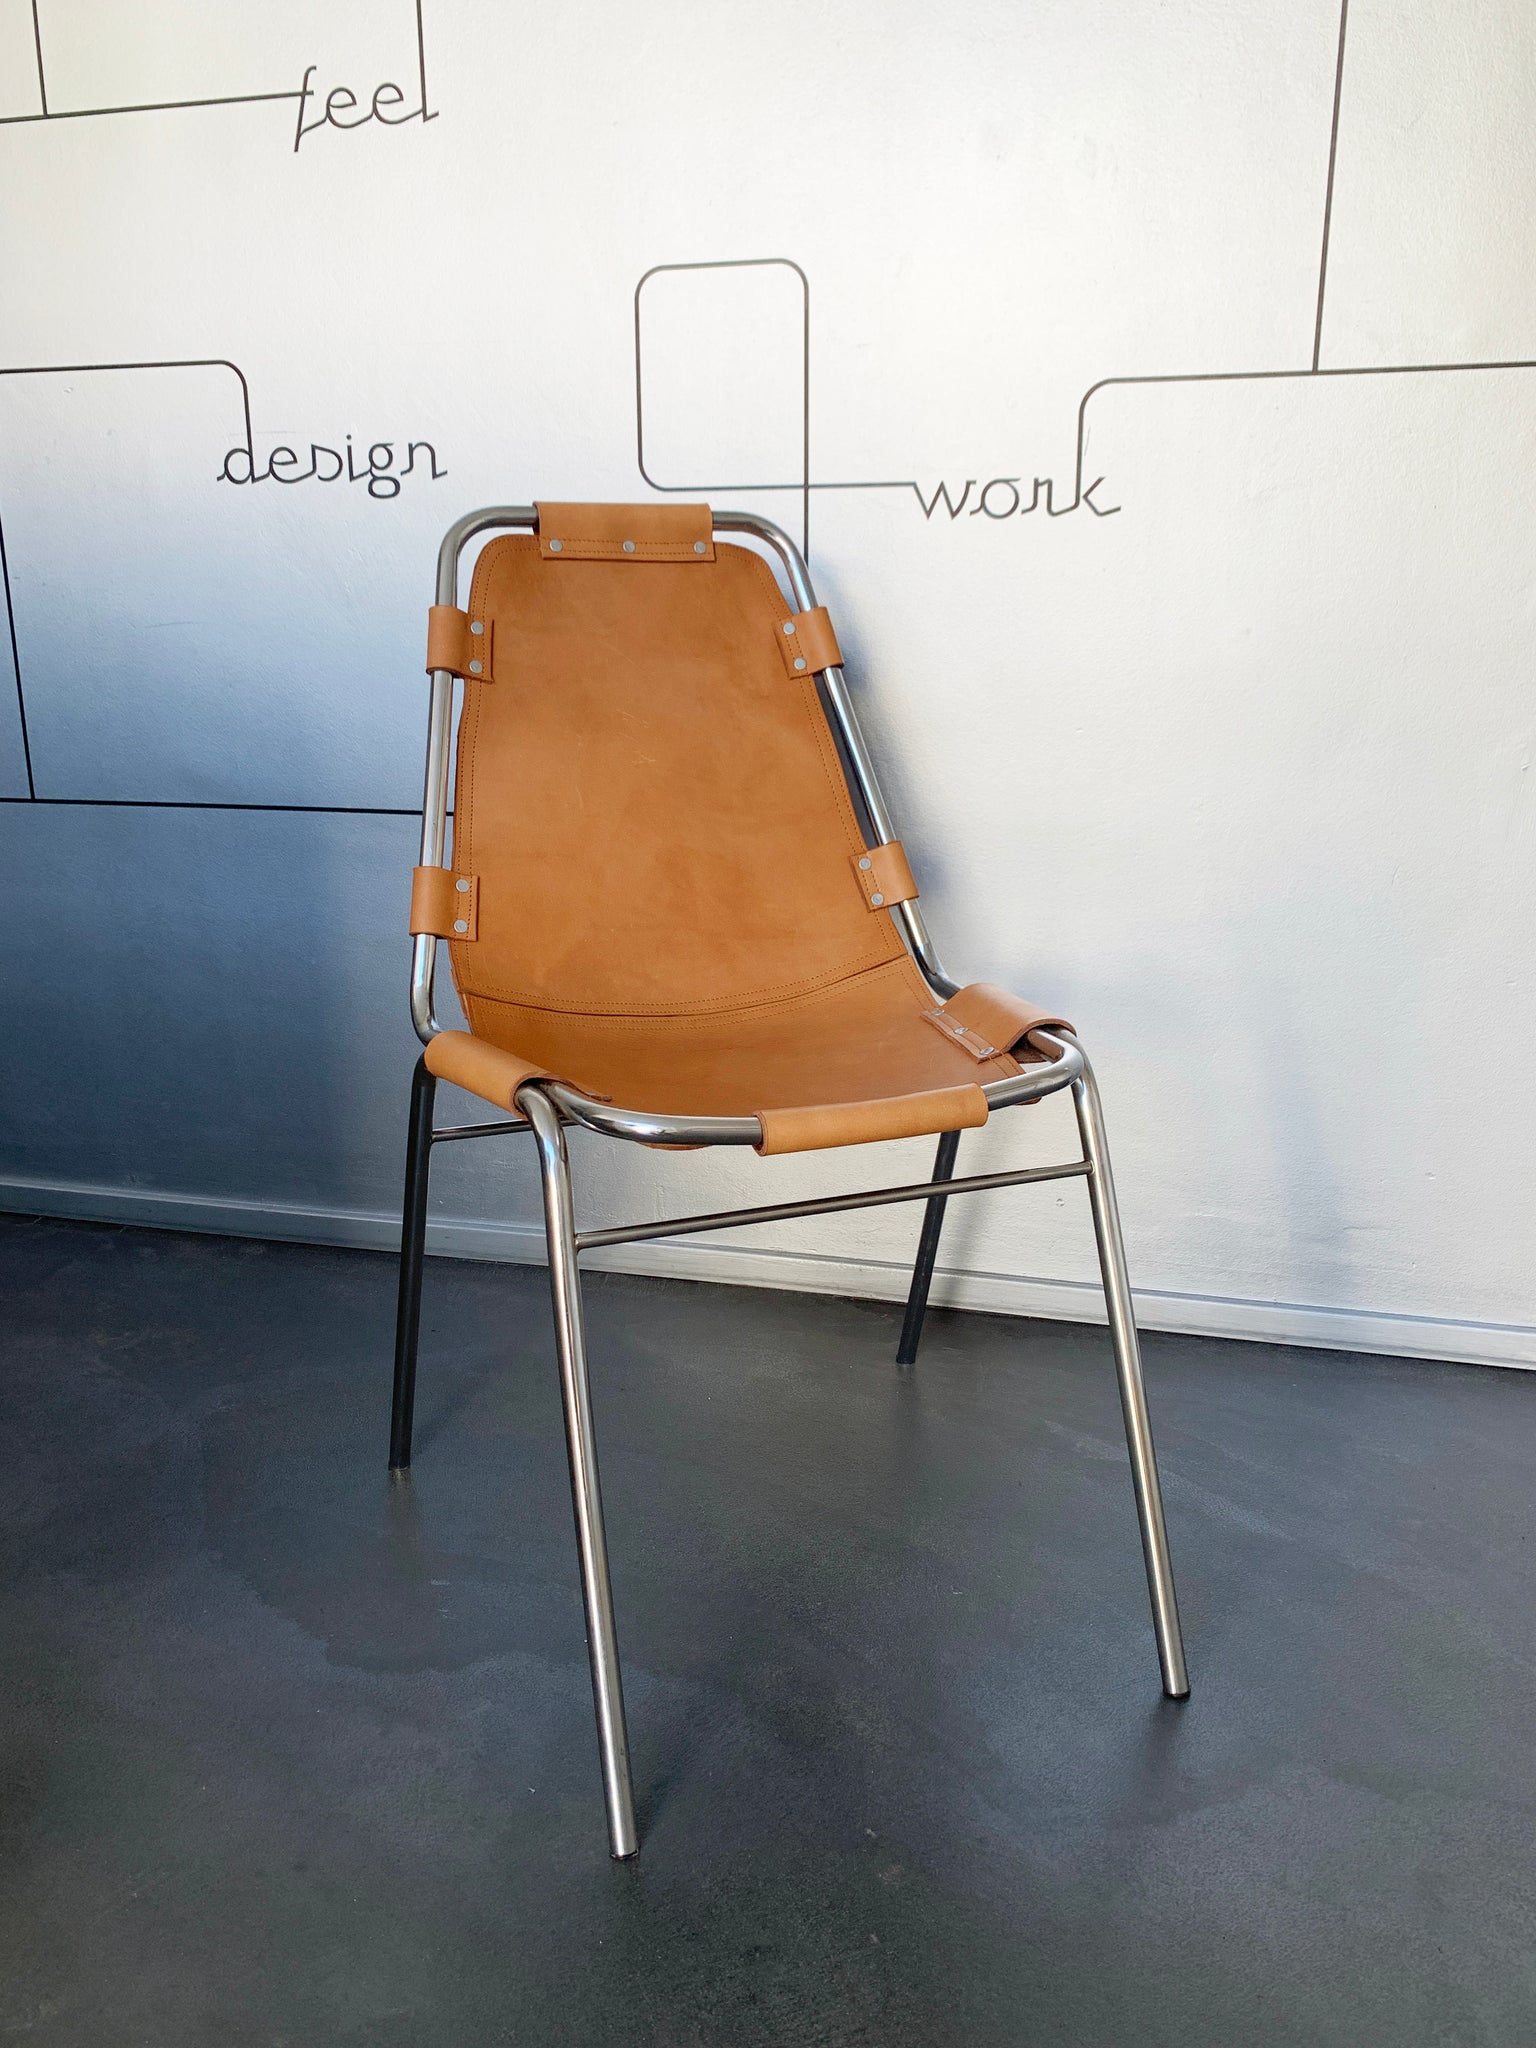 Les Arcs Chairs by Charlotte Perriand, 1960s. For Sale at 1stDibs